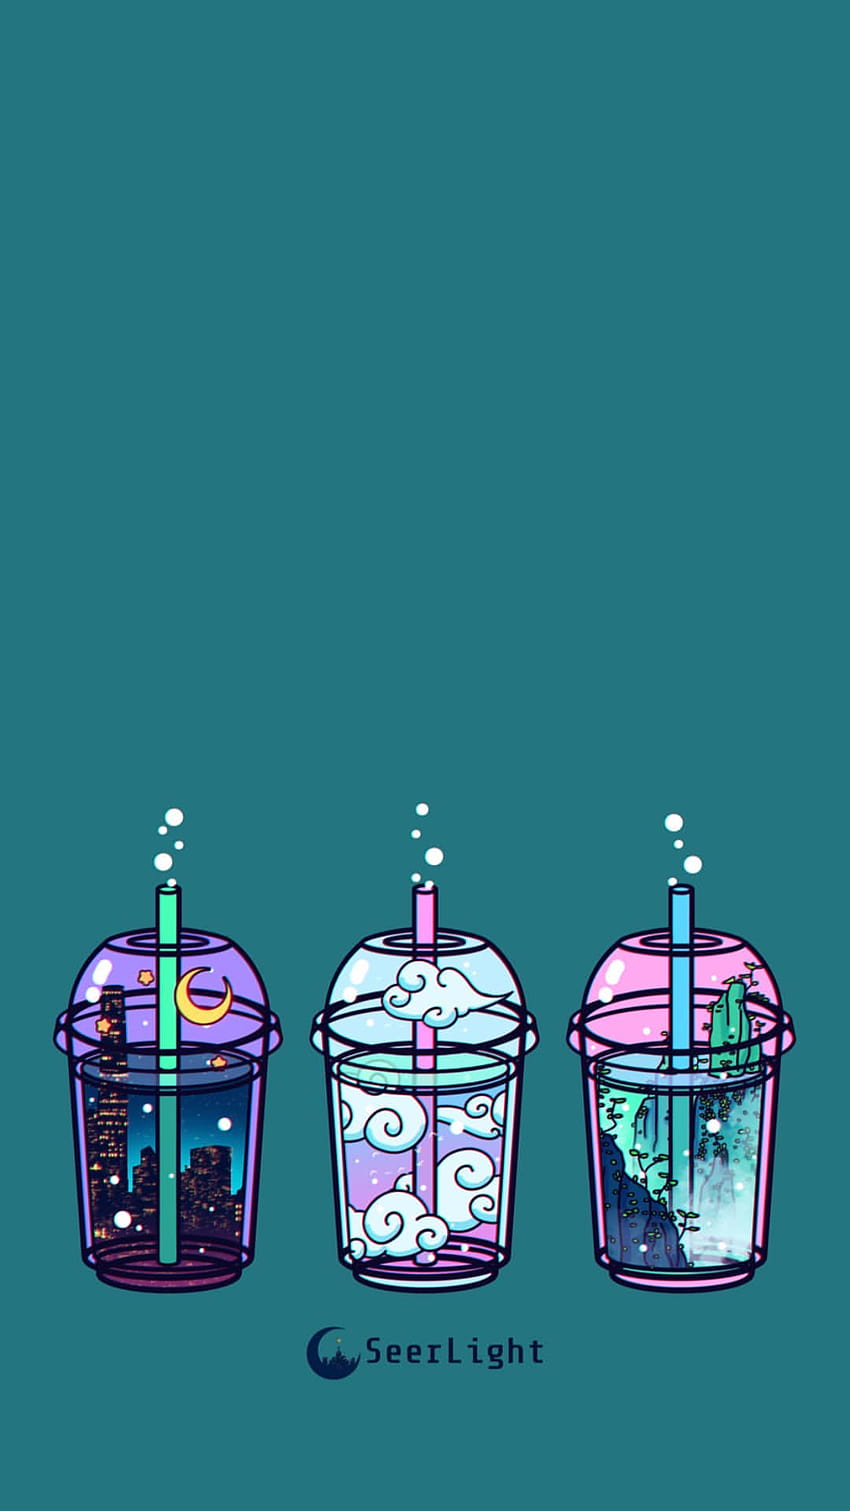 Three cups with different landscapes inside them on a blue background - Boba